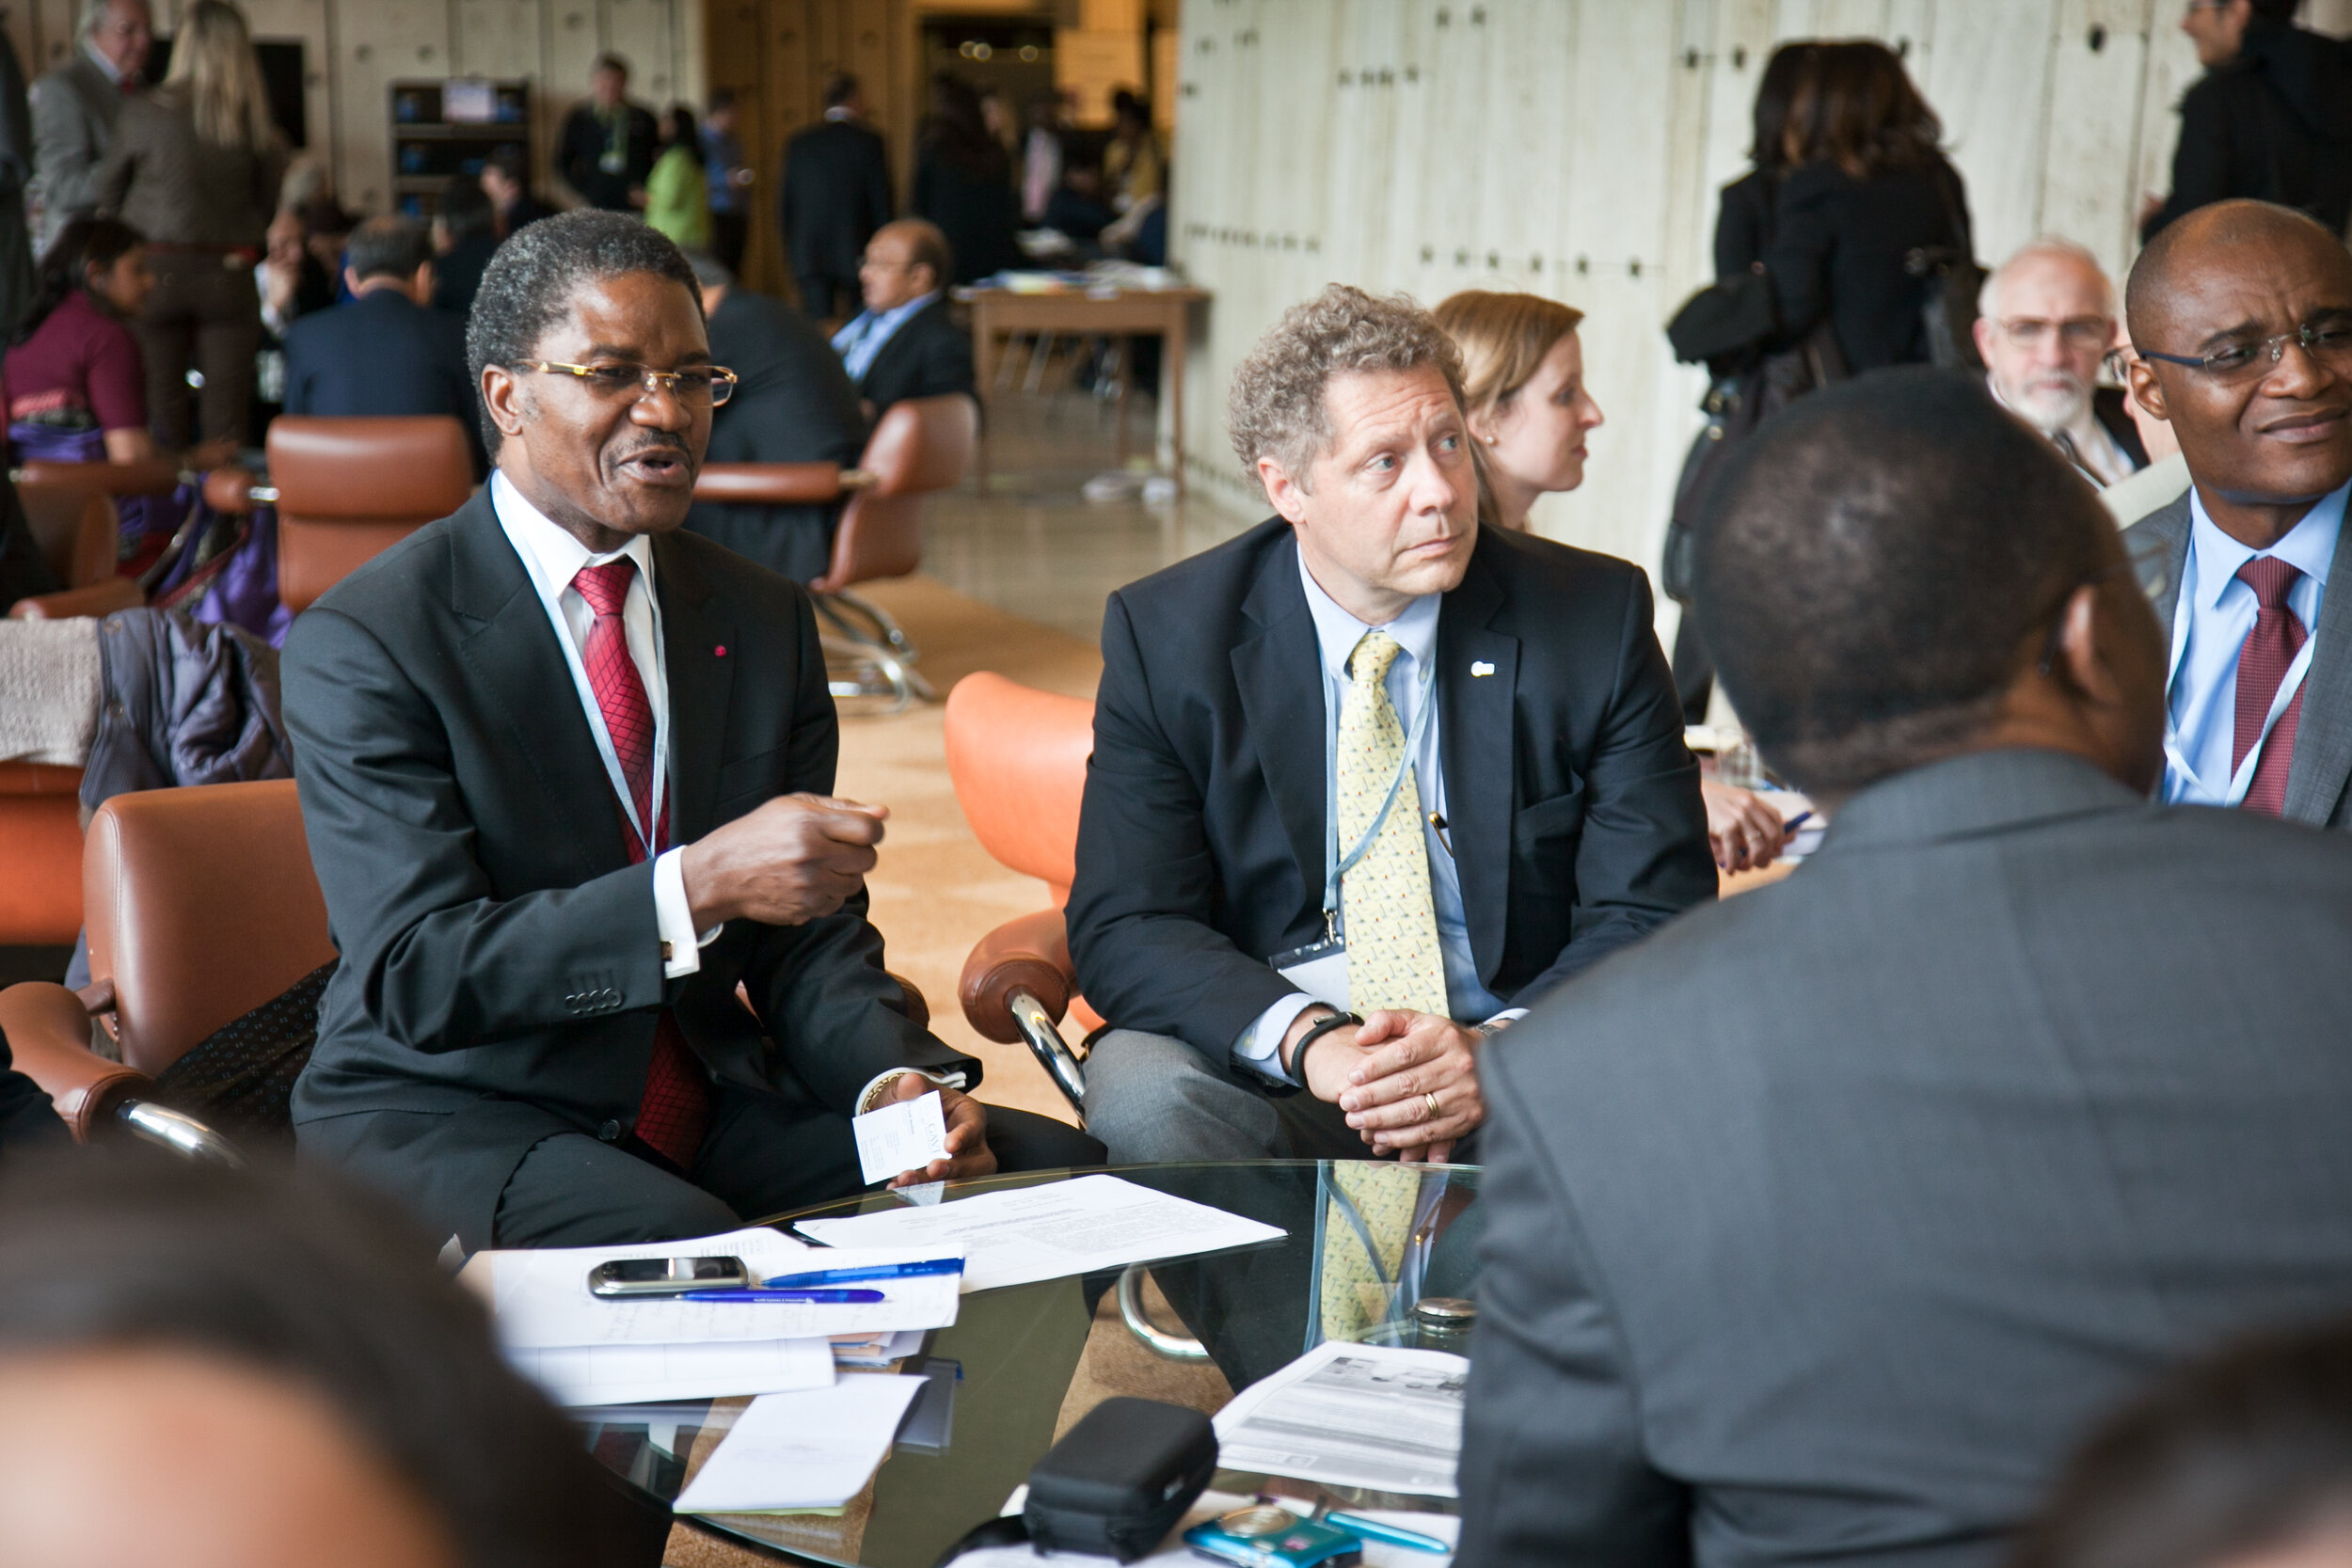  ©Trisa Taro. Seth Berkley, CEO of GAVI Alliance (center), and delegates from African Member States signing a partnership agreement 